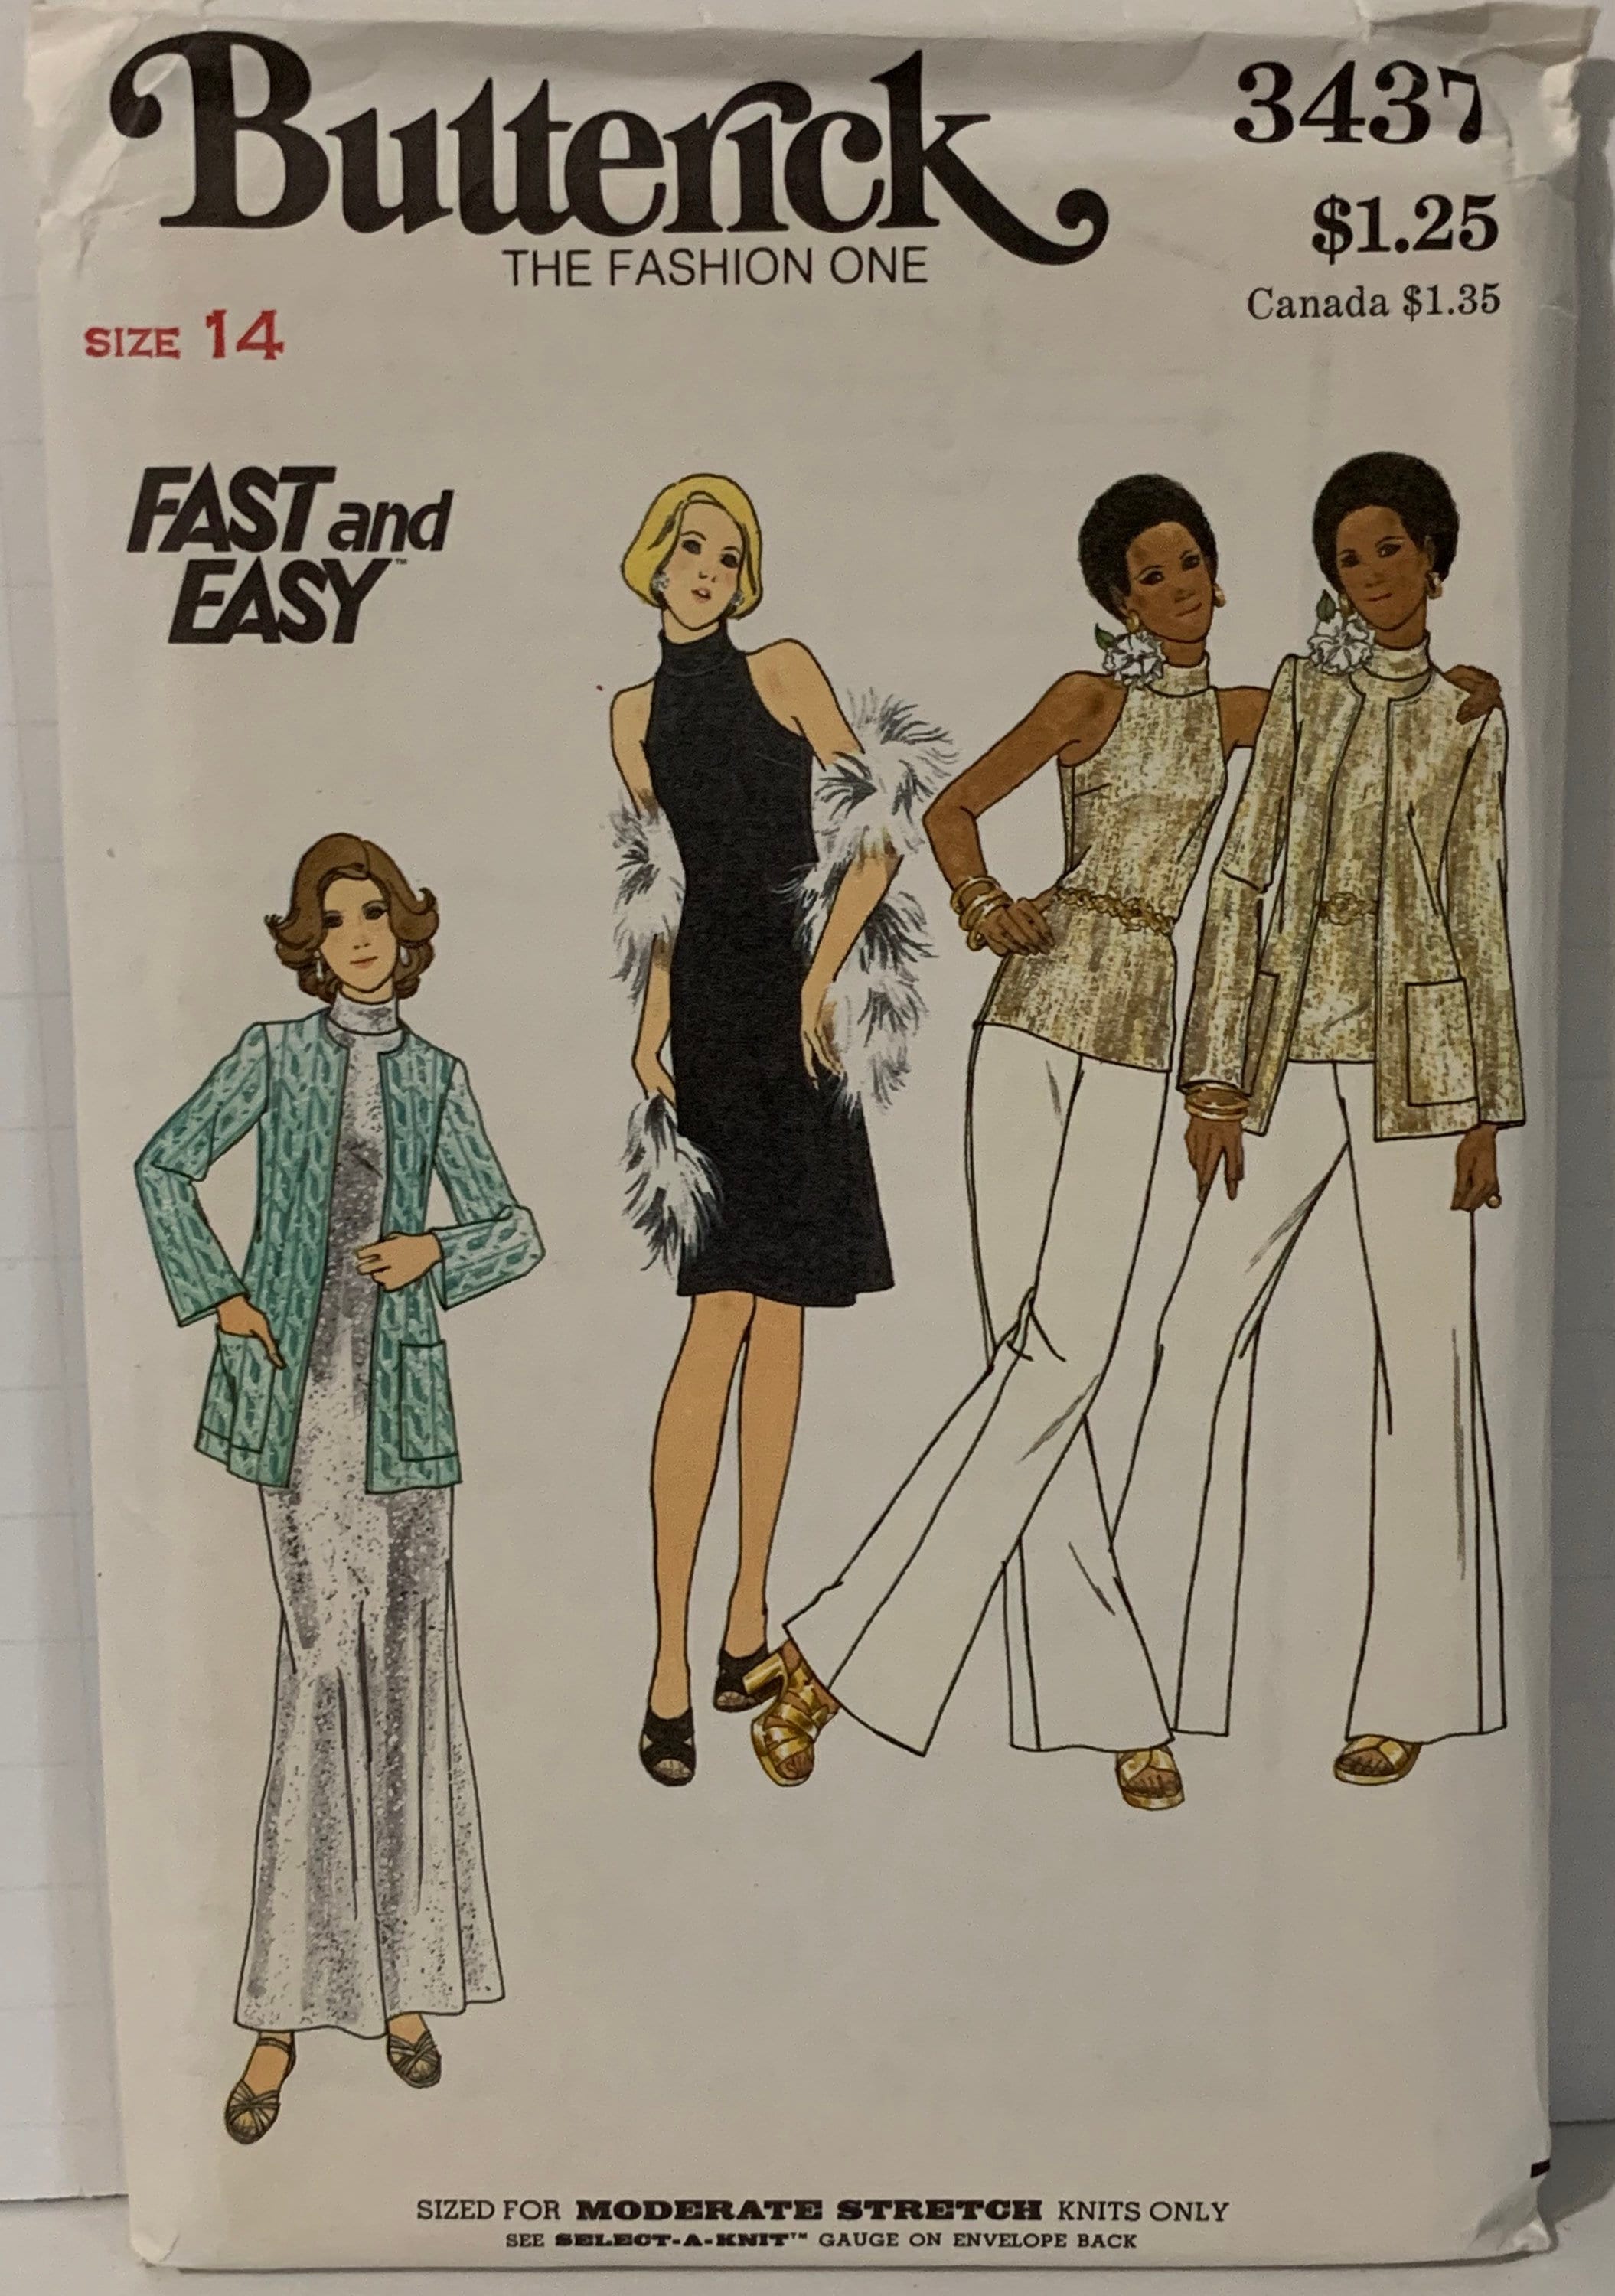 Vintage Sewing Patterns Lot of 14 from 50s 60s 70s – Better